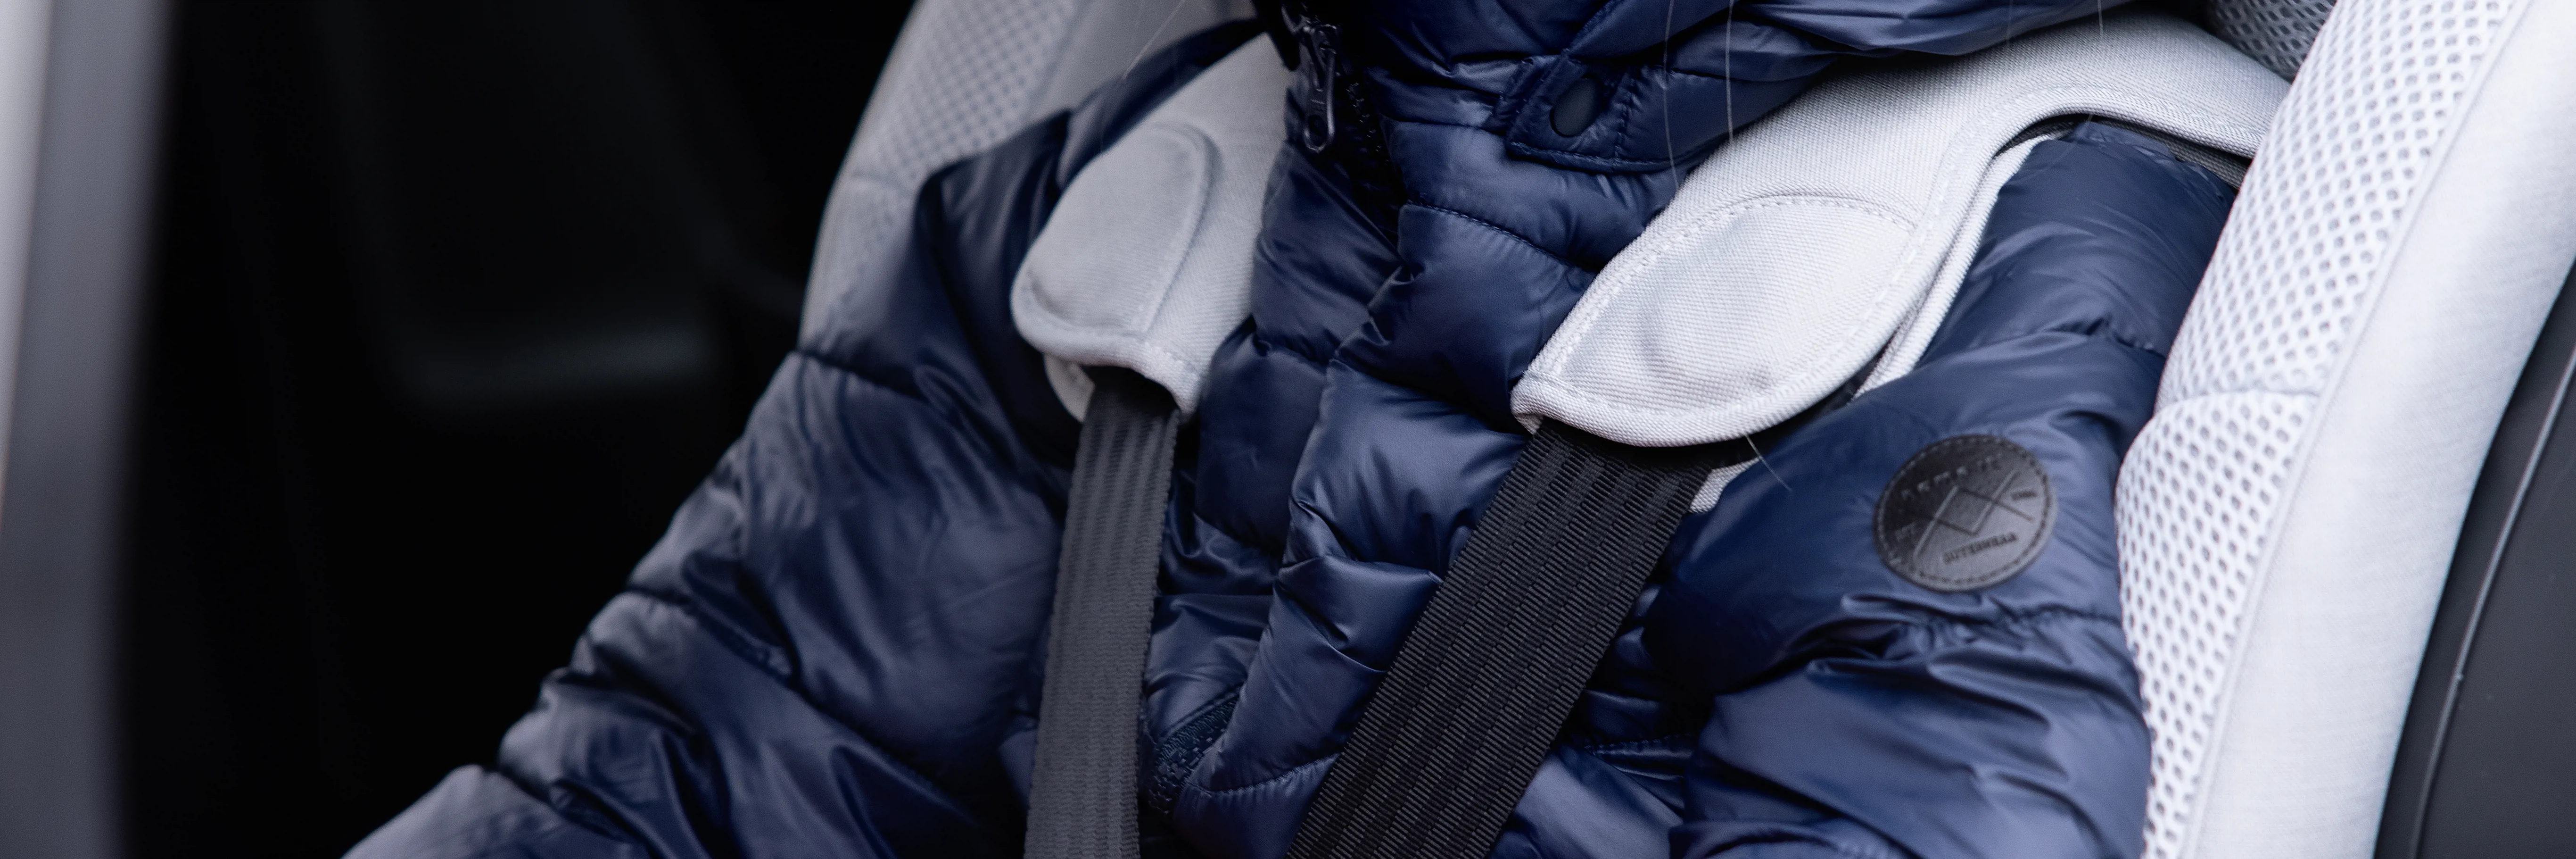 Winter jackets in car seats – Learn why you should remove them